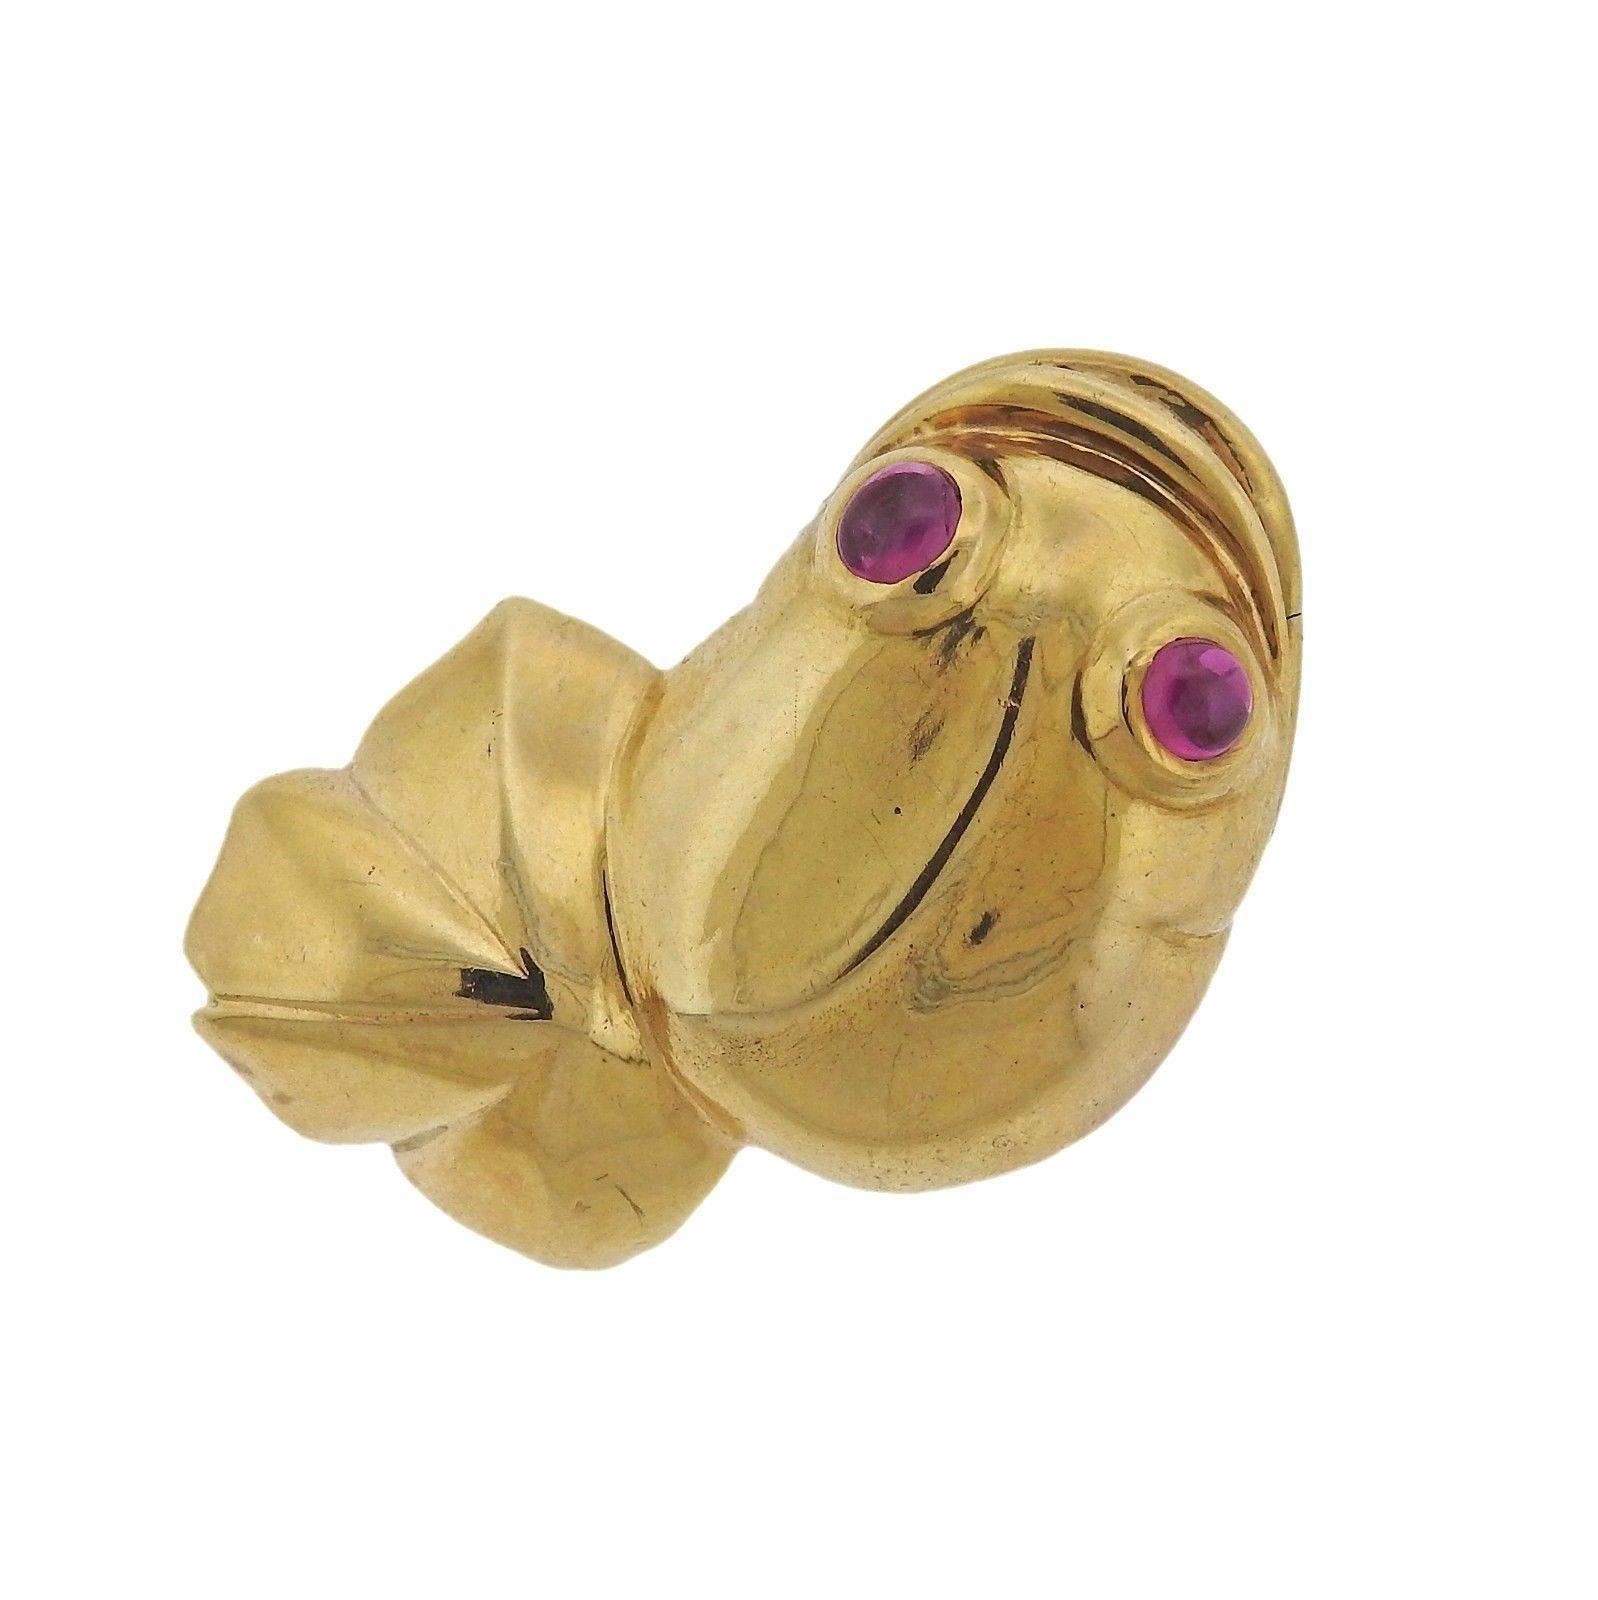 A 14k yellow gold fish brooch set with pink gemstone eyes and diamond teeth.  The brooch measures 47mm x 28mm and weighs 19.6 grams.  Marked: Seaman Schepps.